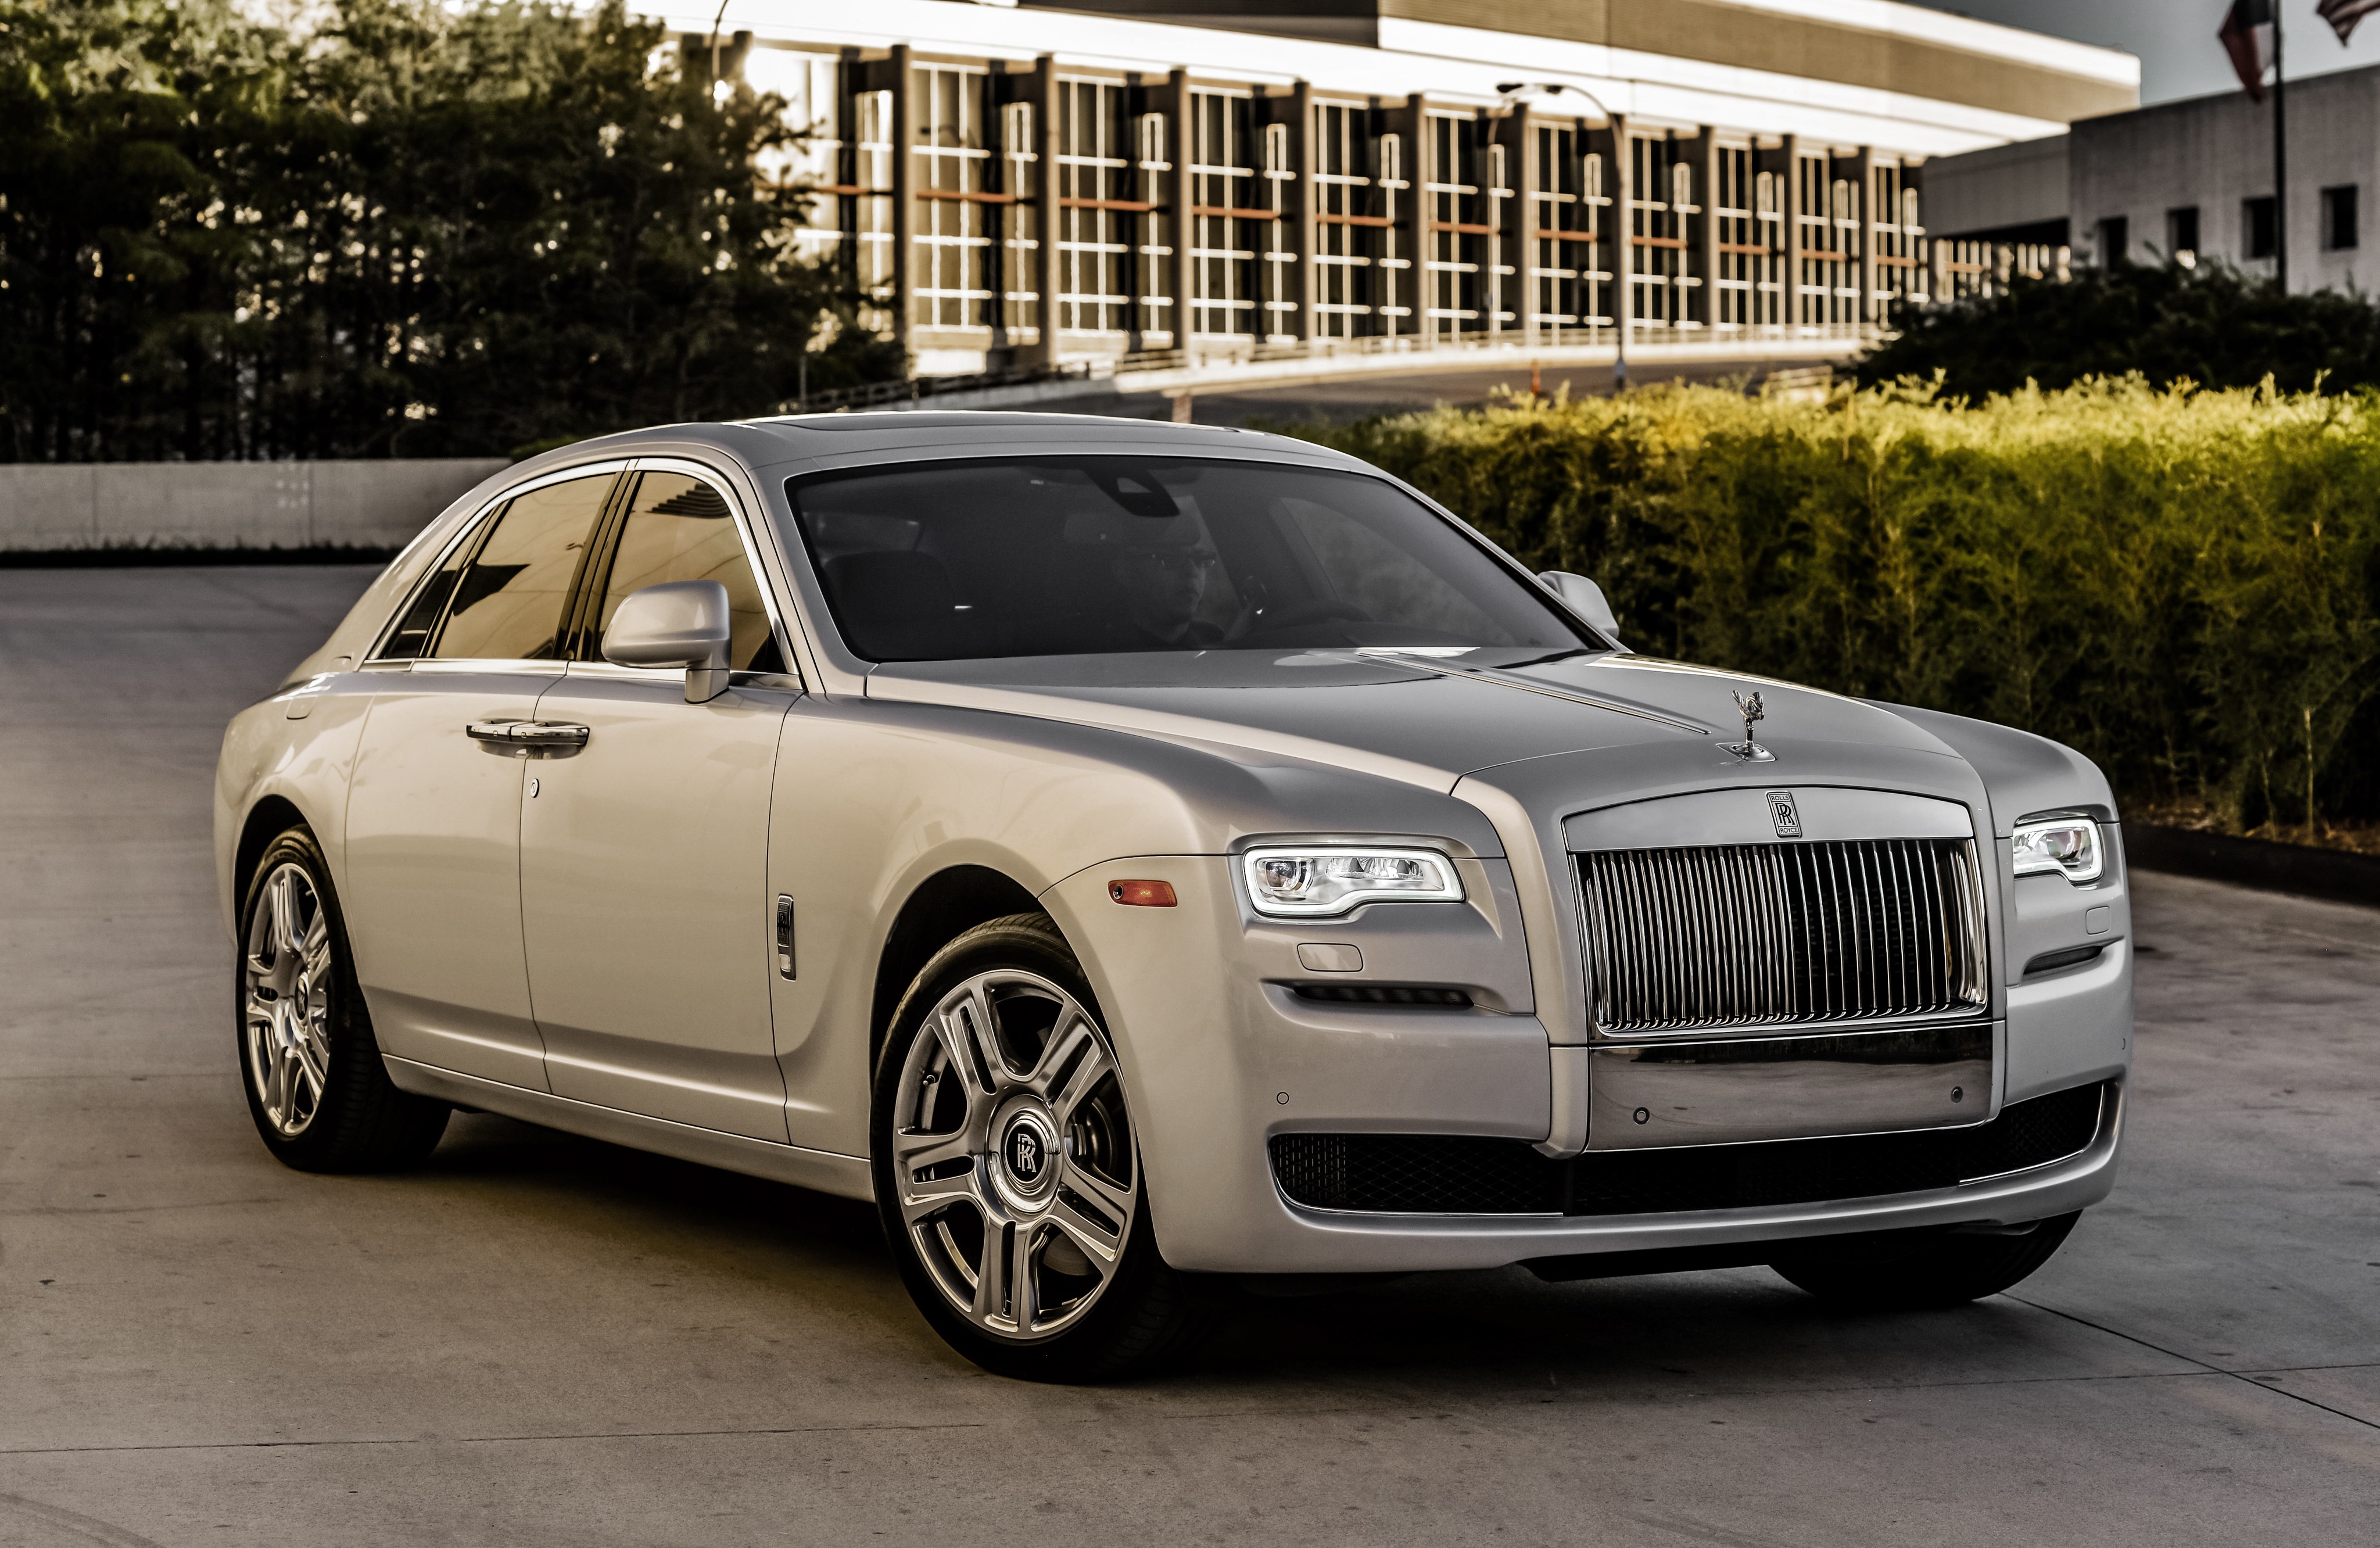 Rolls-Royce Wraith exterior specifications